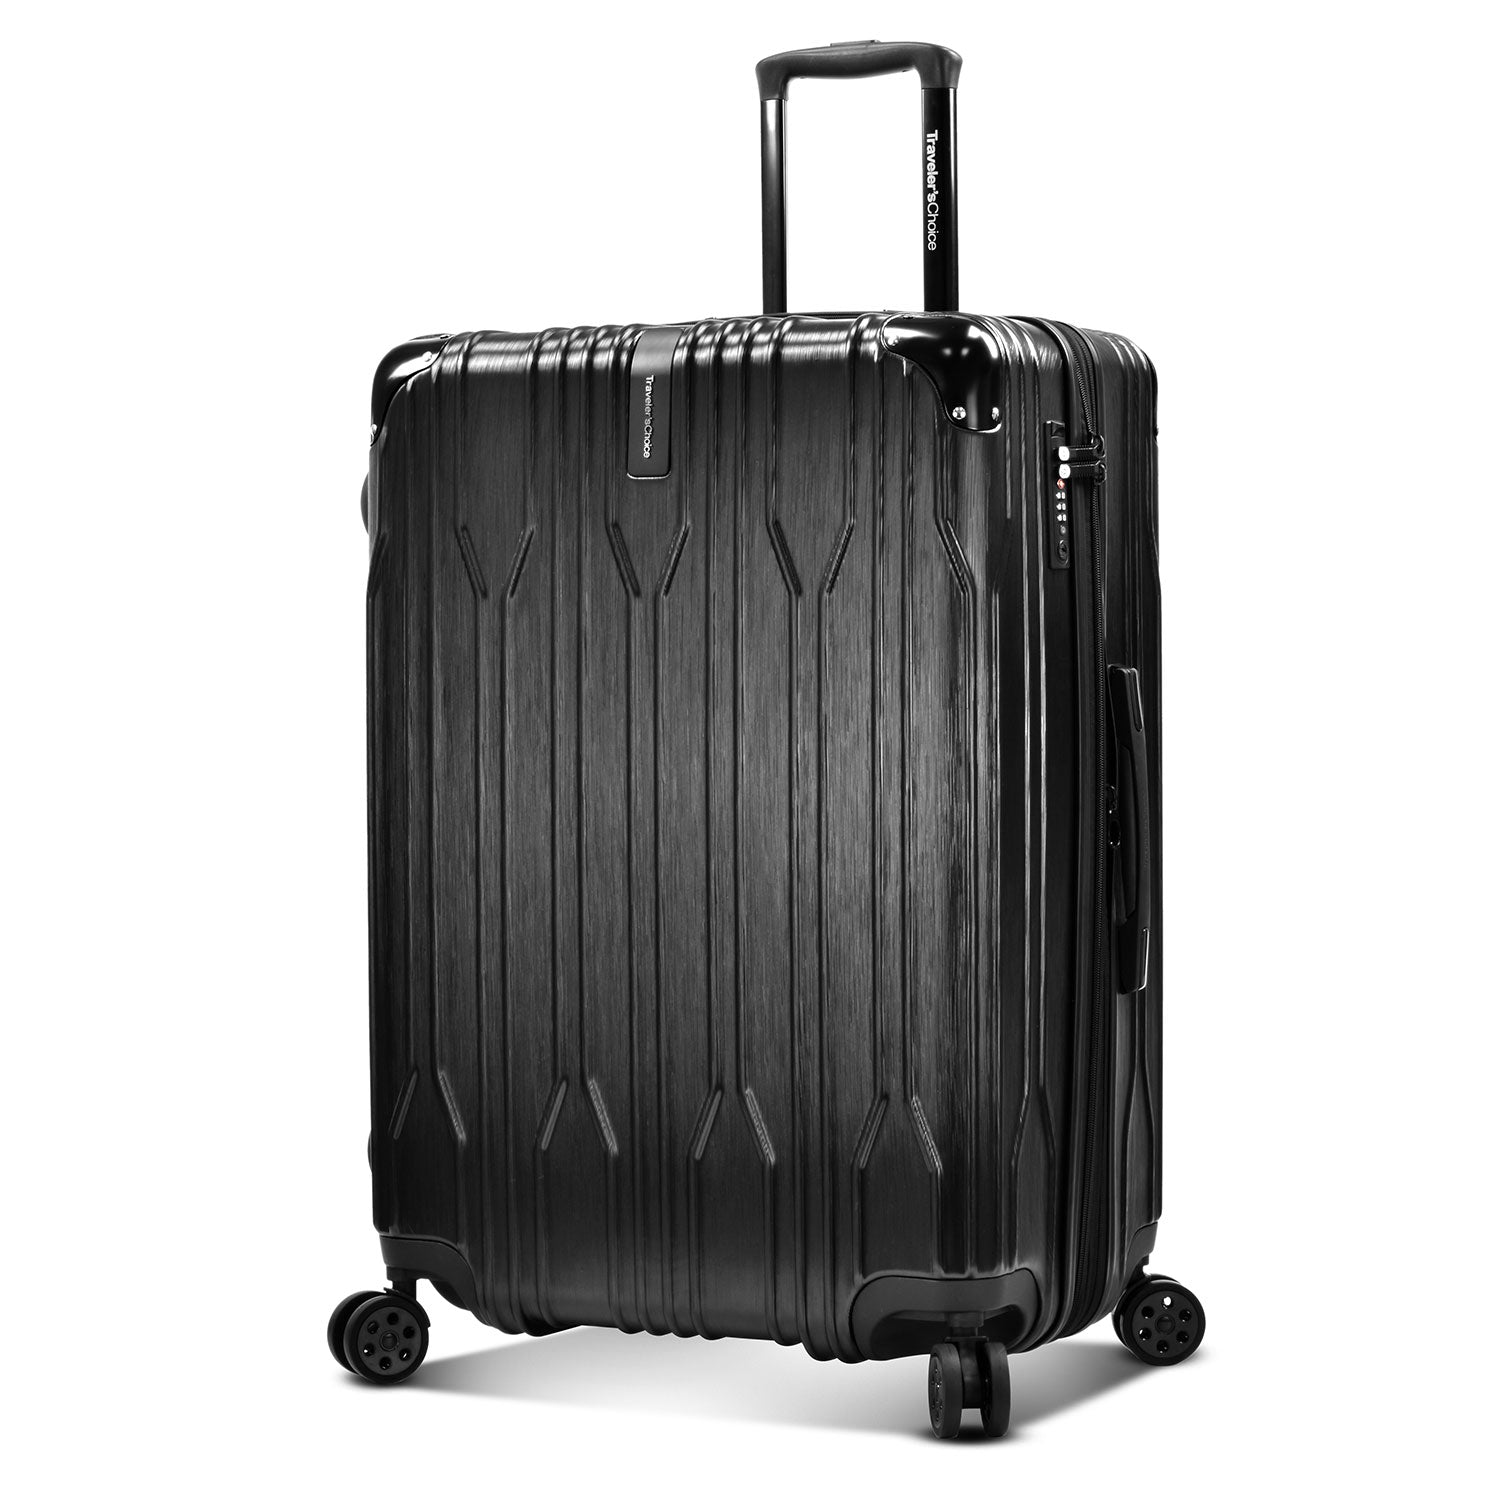 Bell Weather Large Checked Luggage Suitcase with 4 Spinner Wheels